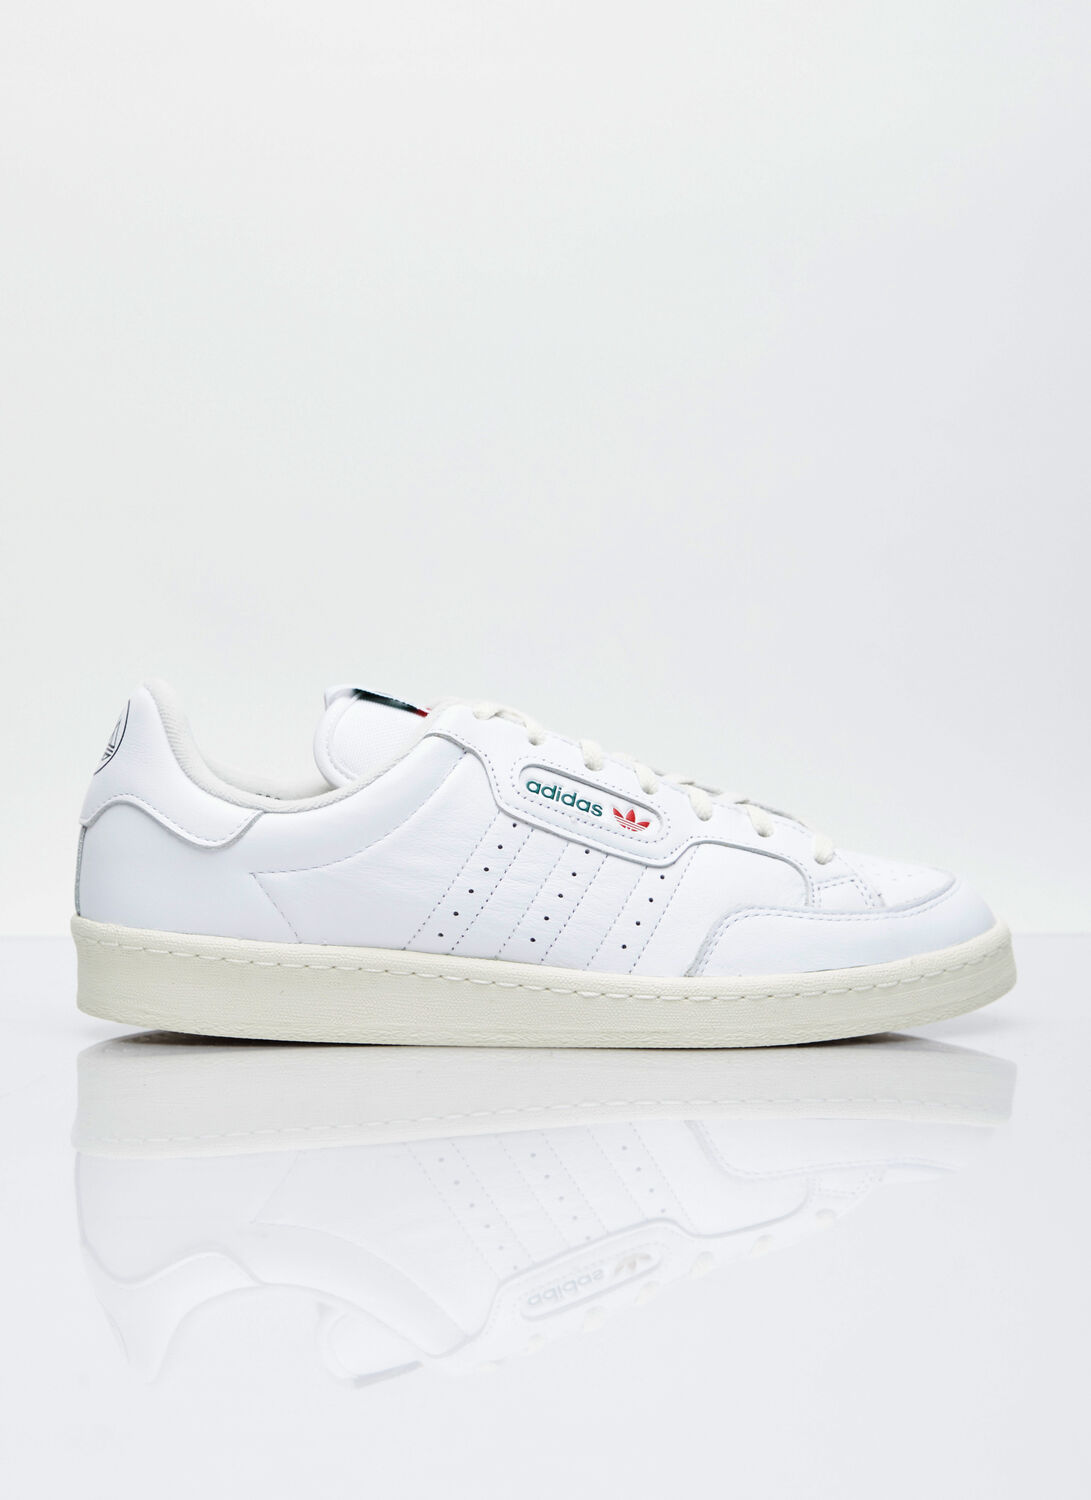 Adidas Originals By Spezial Englewood Spezial Sneakers In White